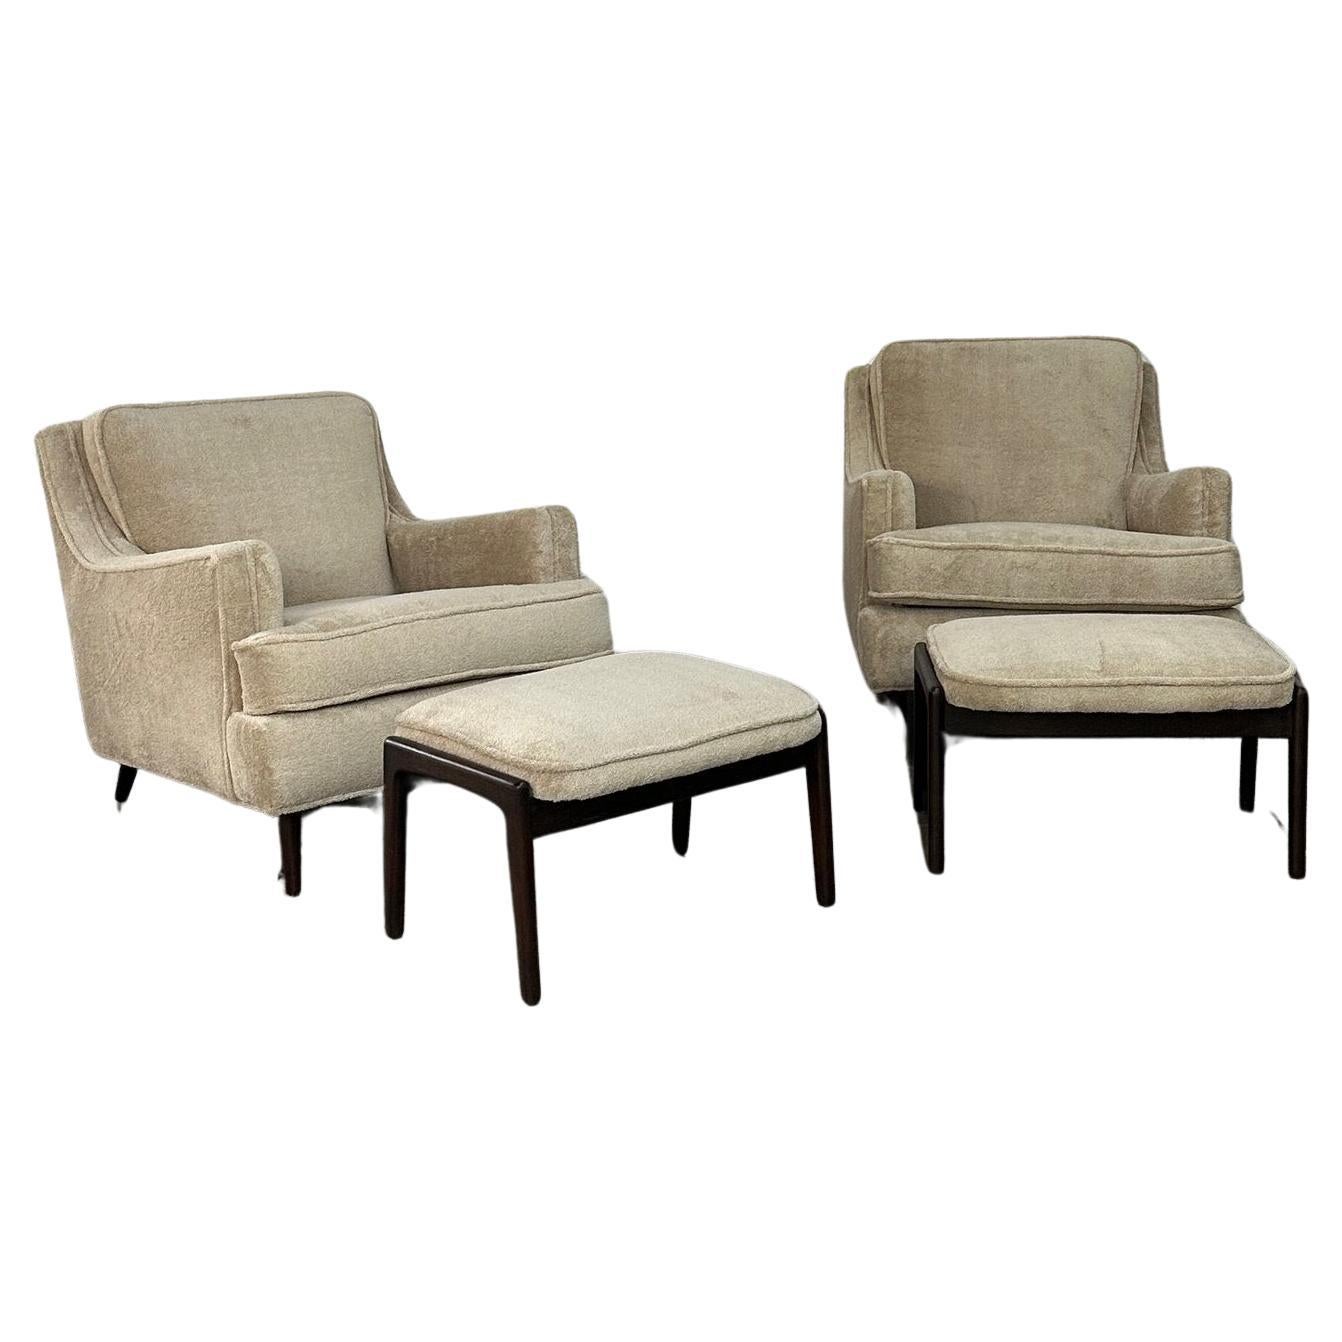 Mid century Lounge chair and Ottoman